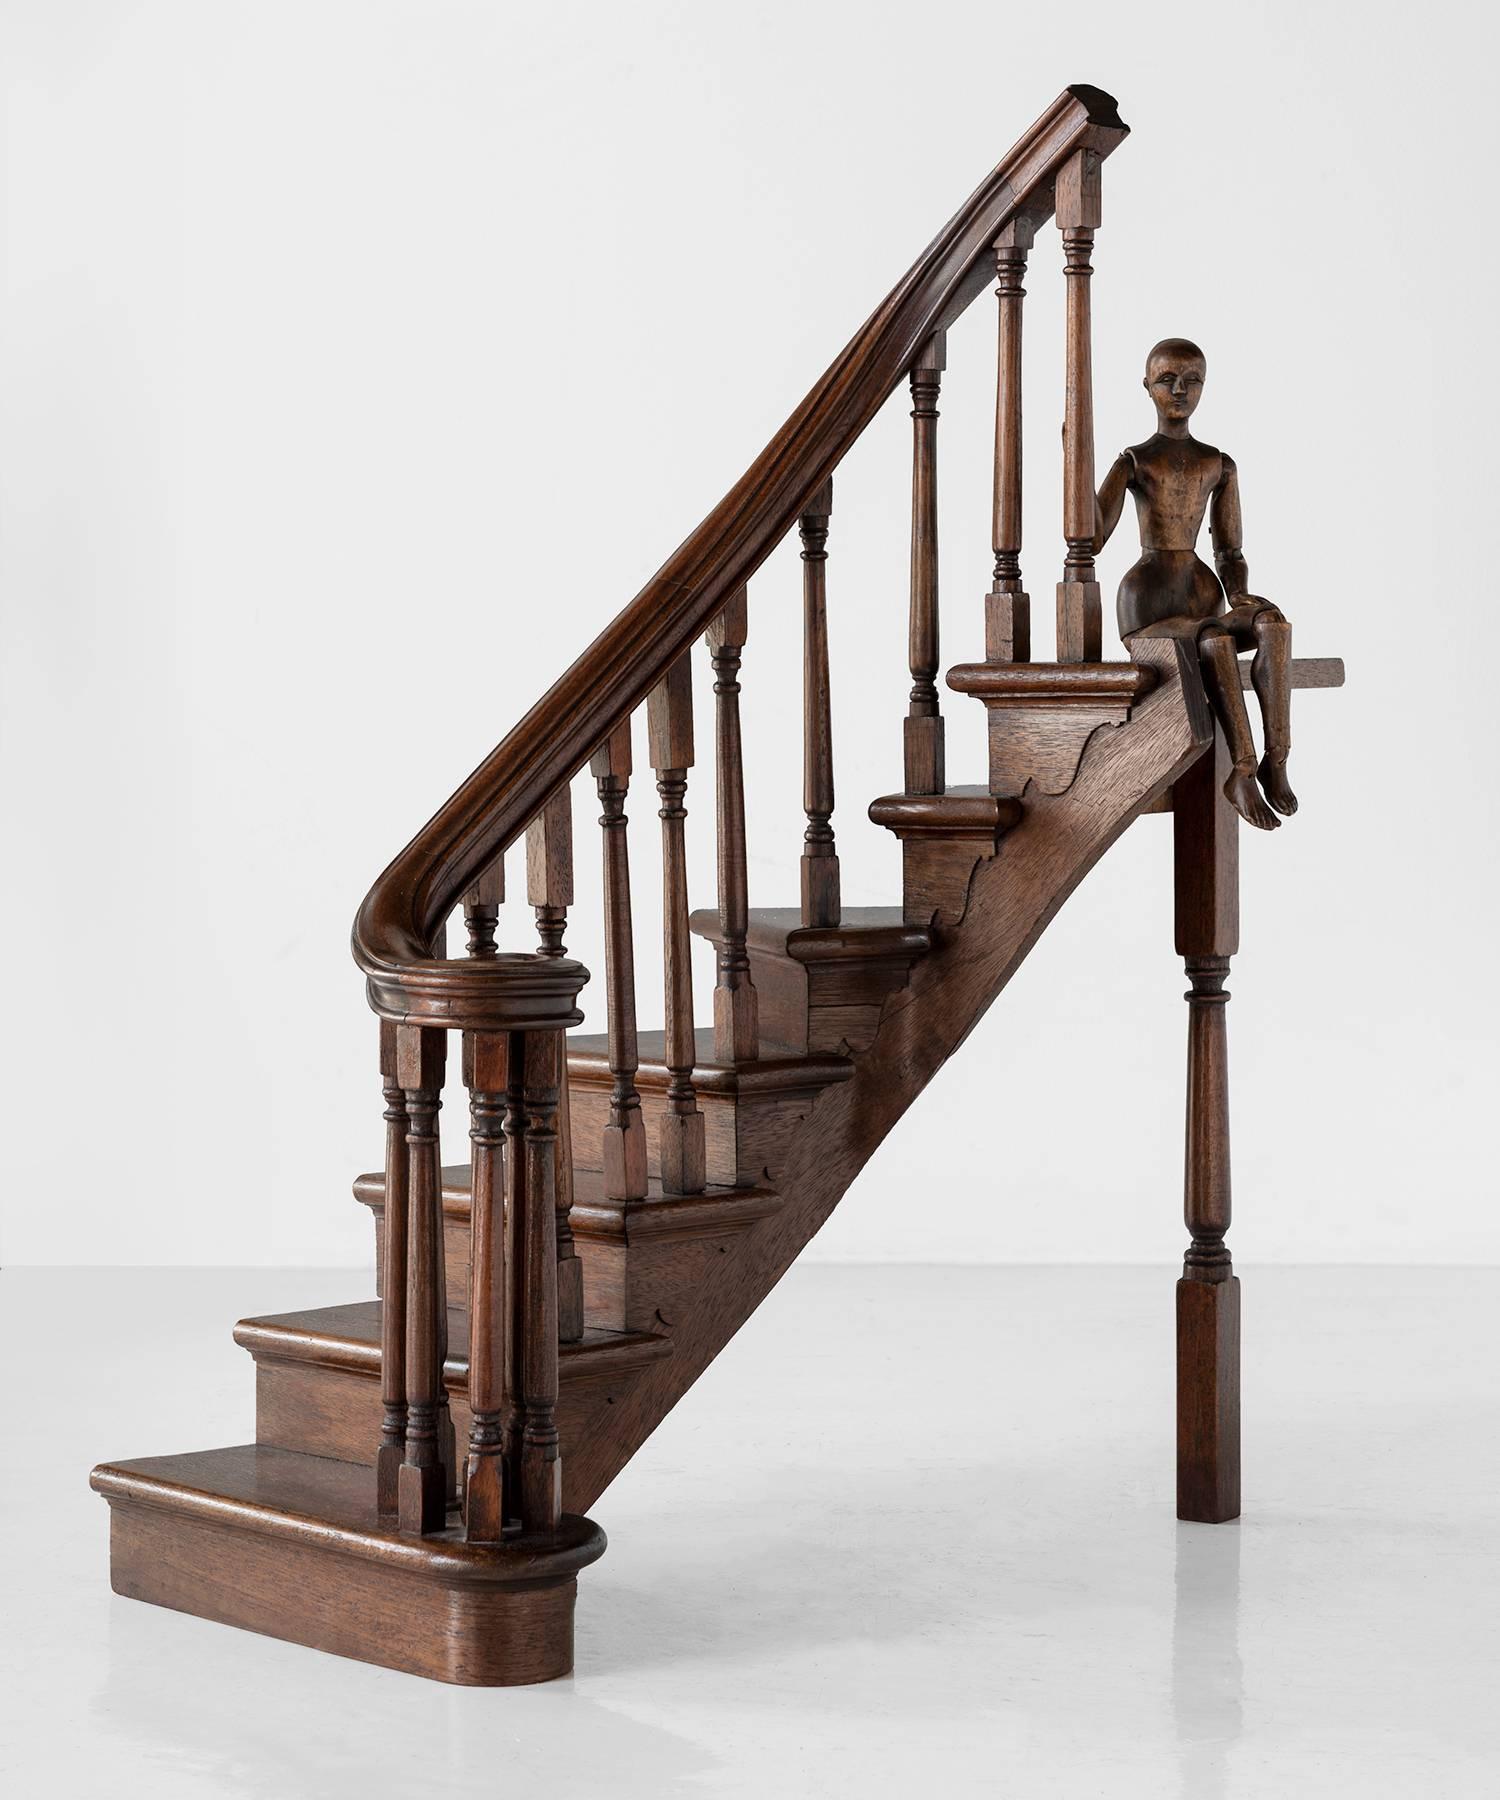 Model staircase, circa 1900

Exquisitely carved freestanding miniature staircase made of oak.